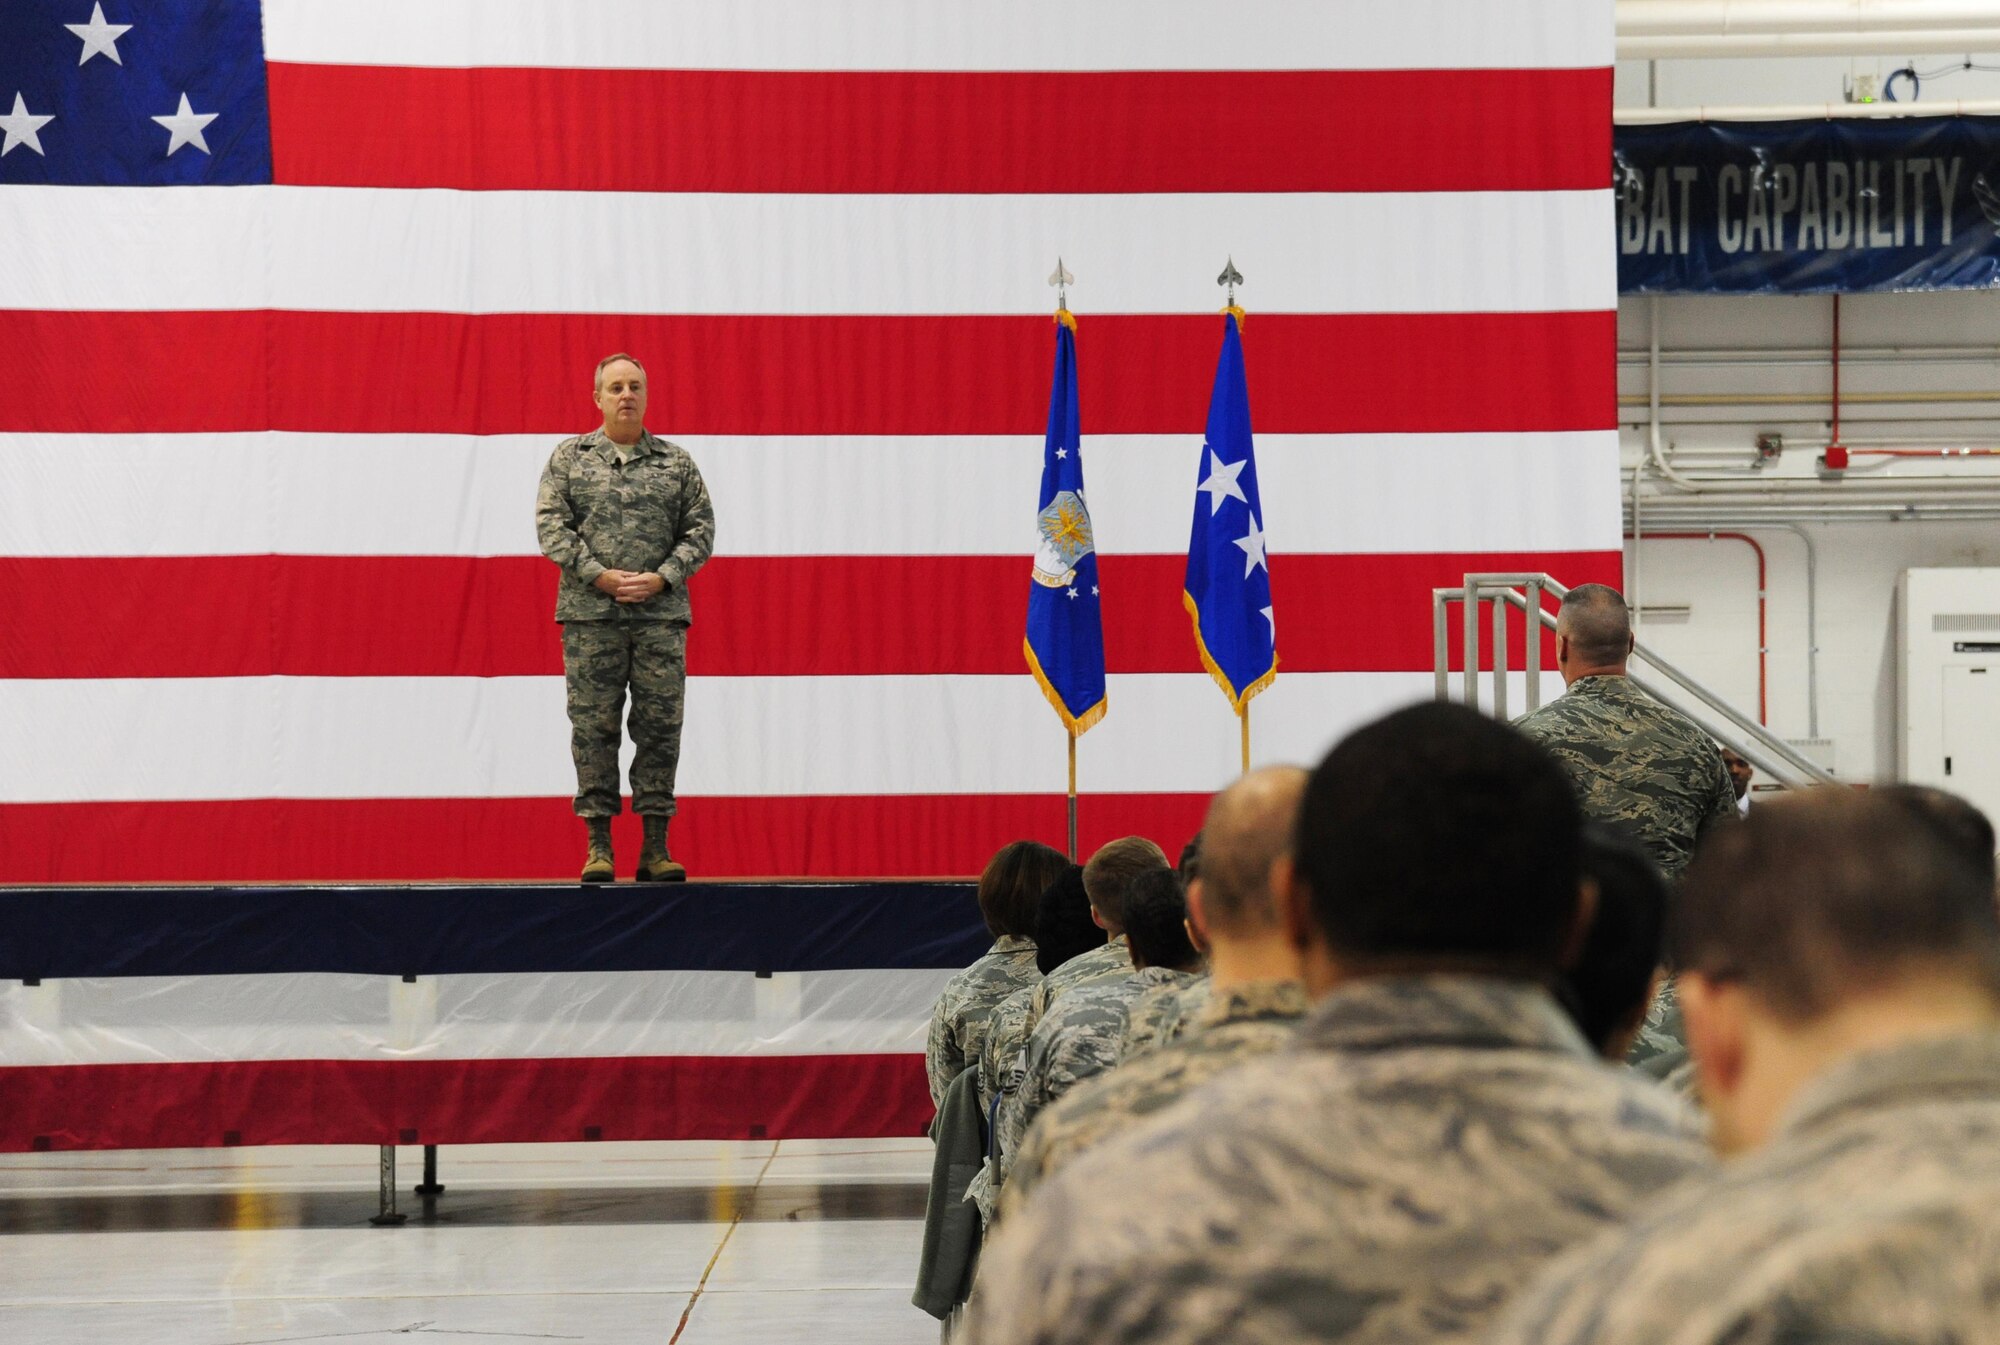 Air Force Chief of Staff Gen. Mark A. Welsh III speaks at an all call during his visit at Whiteman Air Force Base, Mo., Feb. 17, 2016. Welsh stressed the importance of executing the Global Strike mission and expressed his gratitude to the Total Force Airmen. (U.S. Air Force photo by Senior Airman Joel Pfiester)